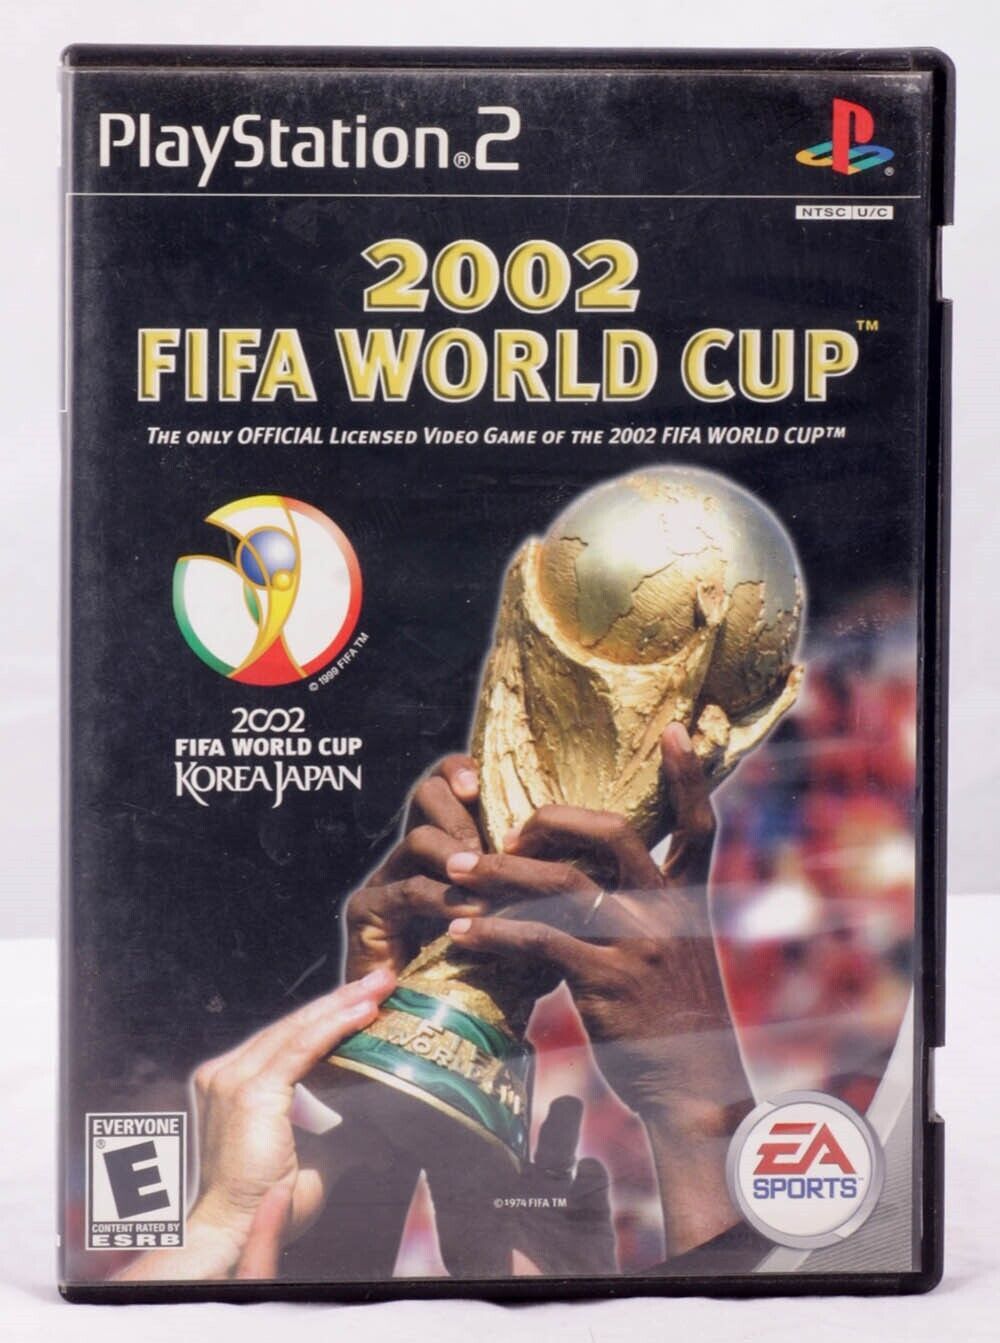 Primary image for 2002 FIFA World Cup PS2 Game (Sony PlayStation 2, 2002) Soccer 